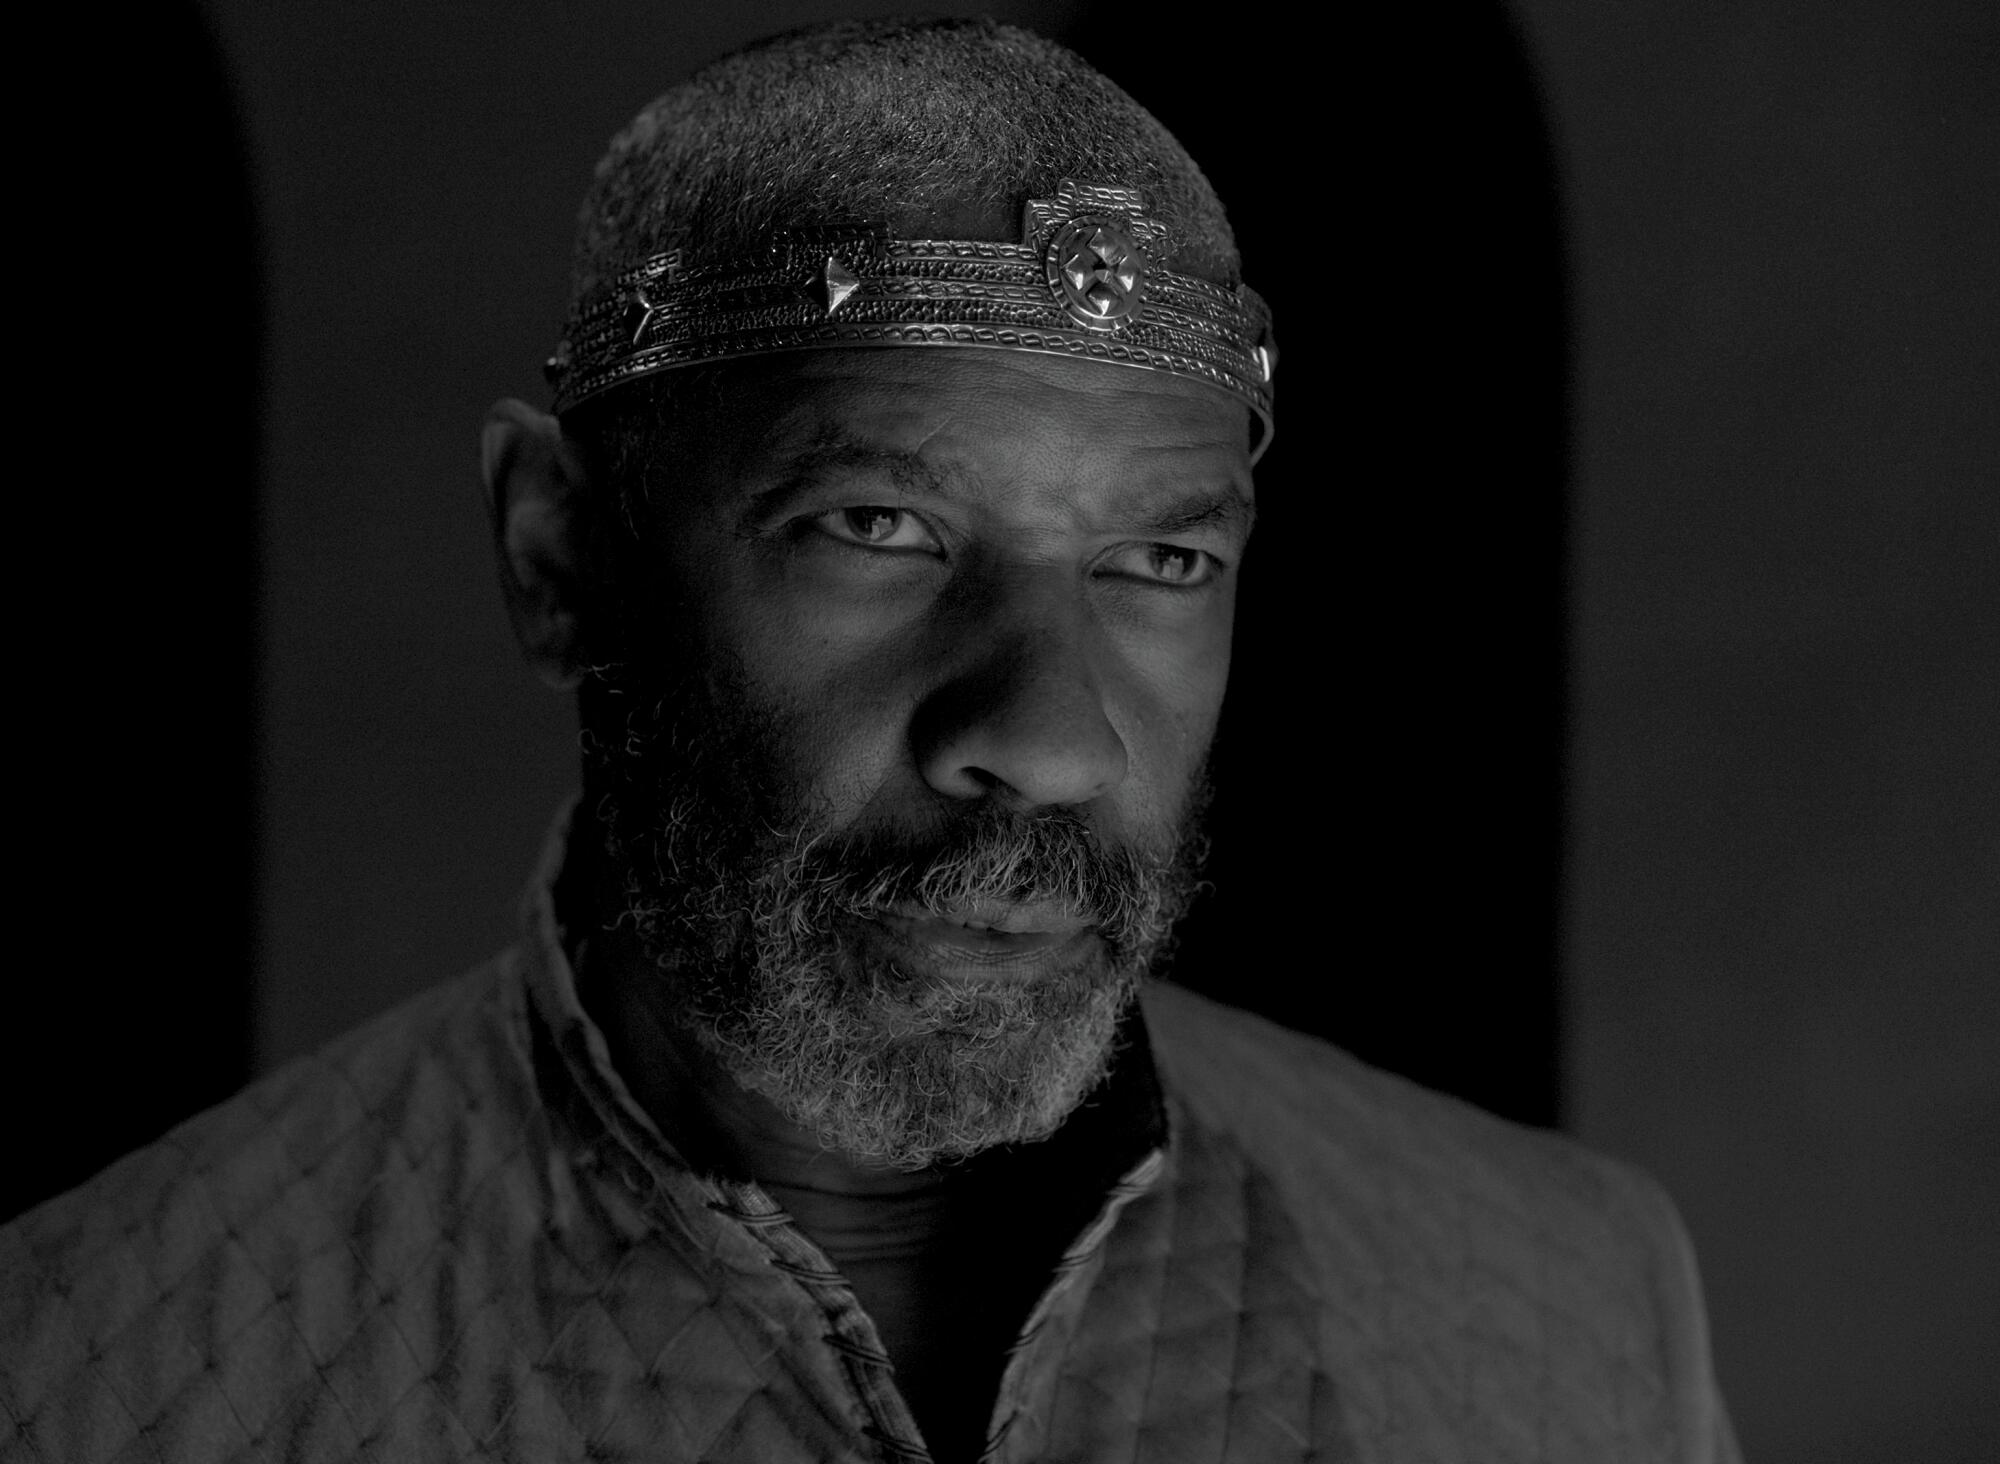 "Denzel's performance is a marvel of balance and precision," producer Robert Graf says of Washington's Macbeth.